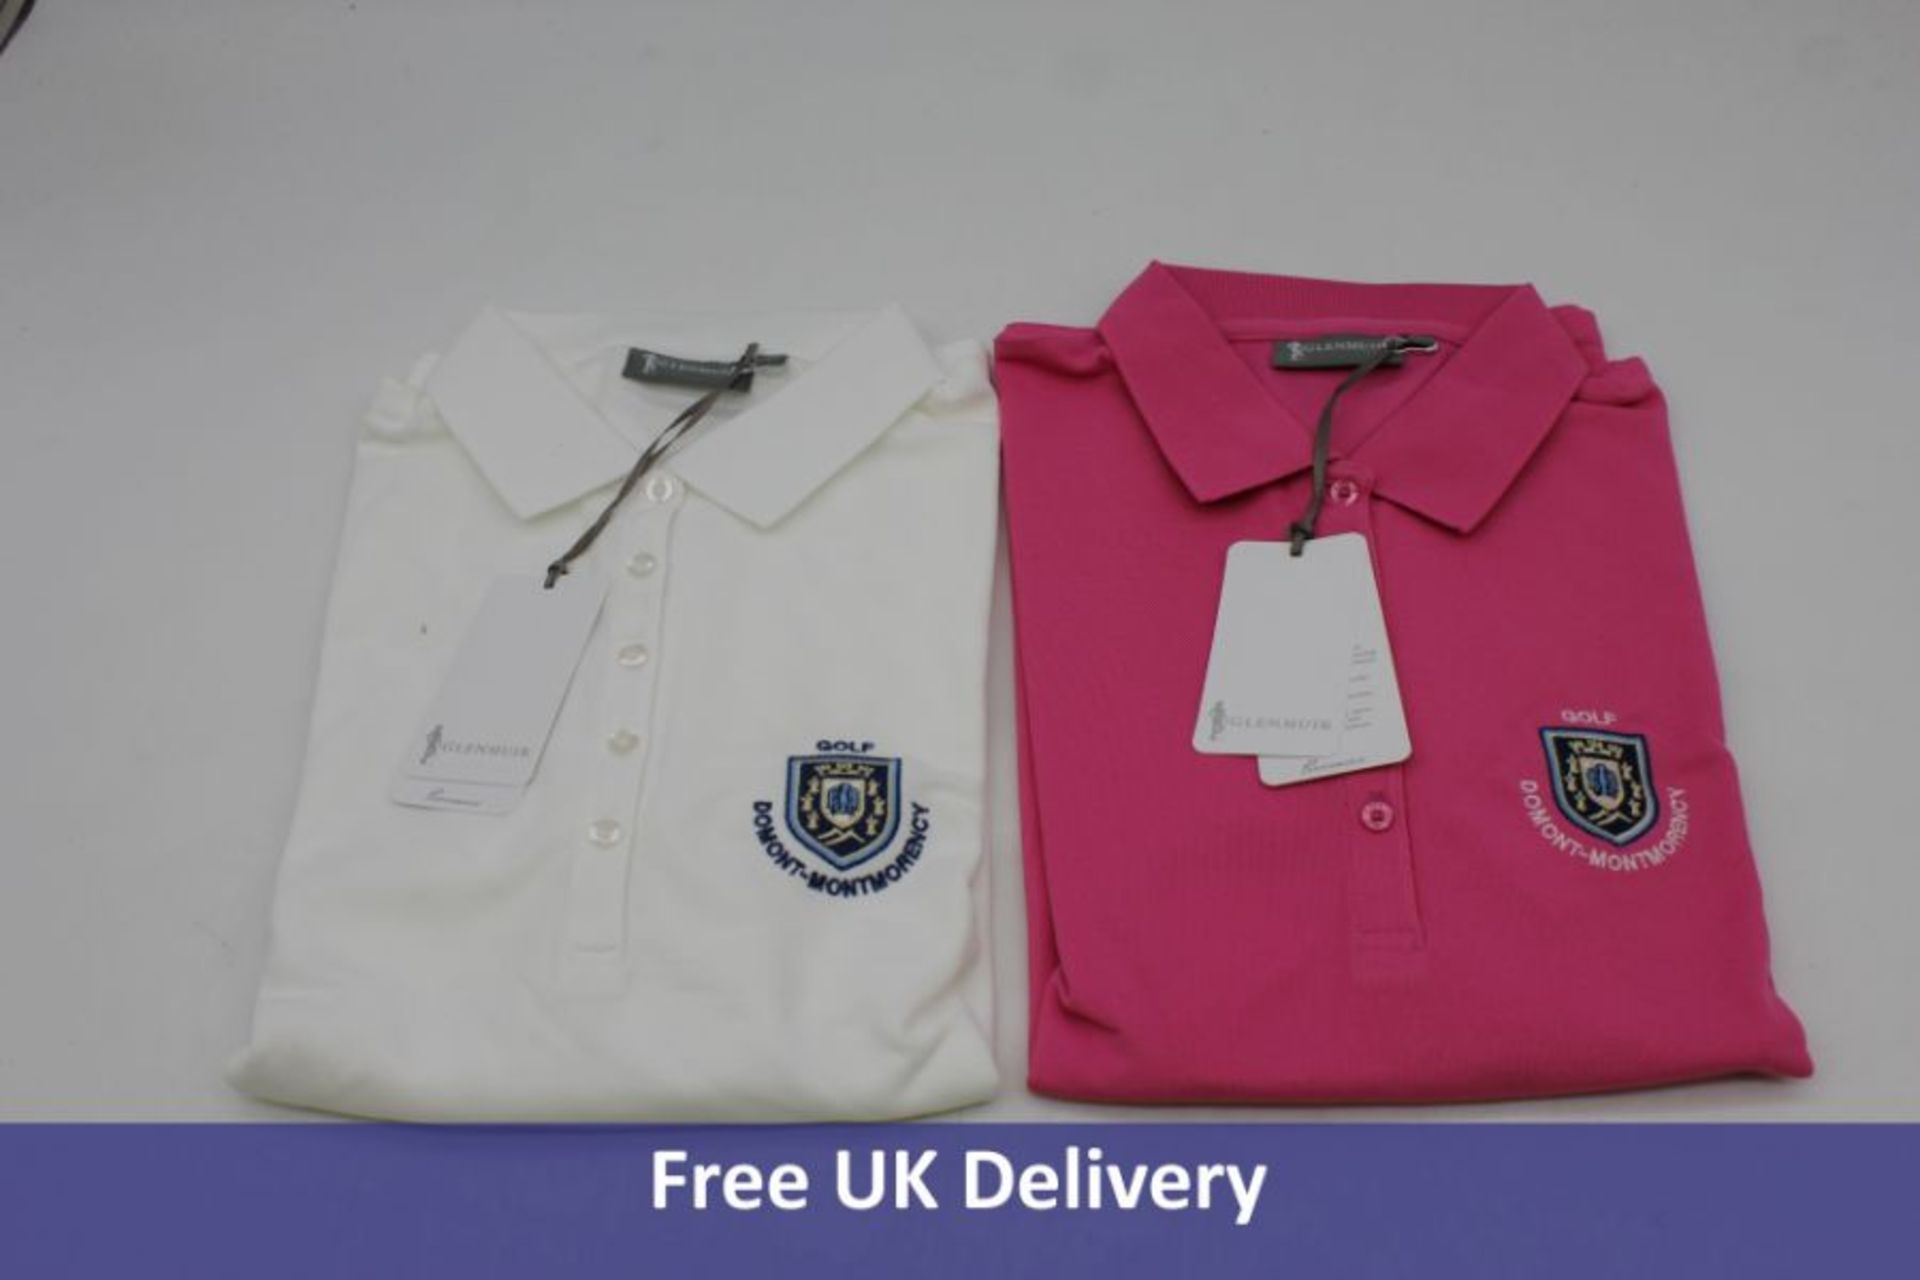 Six Glenmuir Ladies Misha Performance Pique Long Sleeve Golf Polo Tops, 1x Hot Pink, L, 1x White, L, - Image 3 of 3